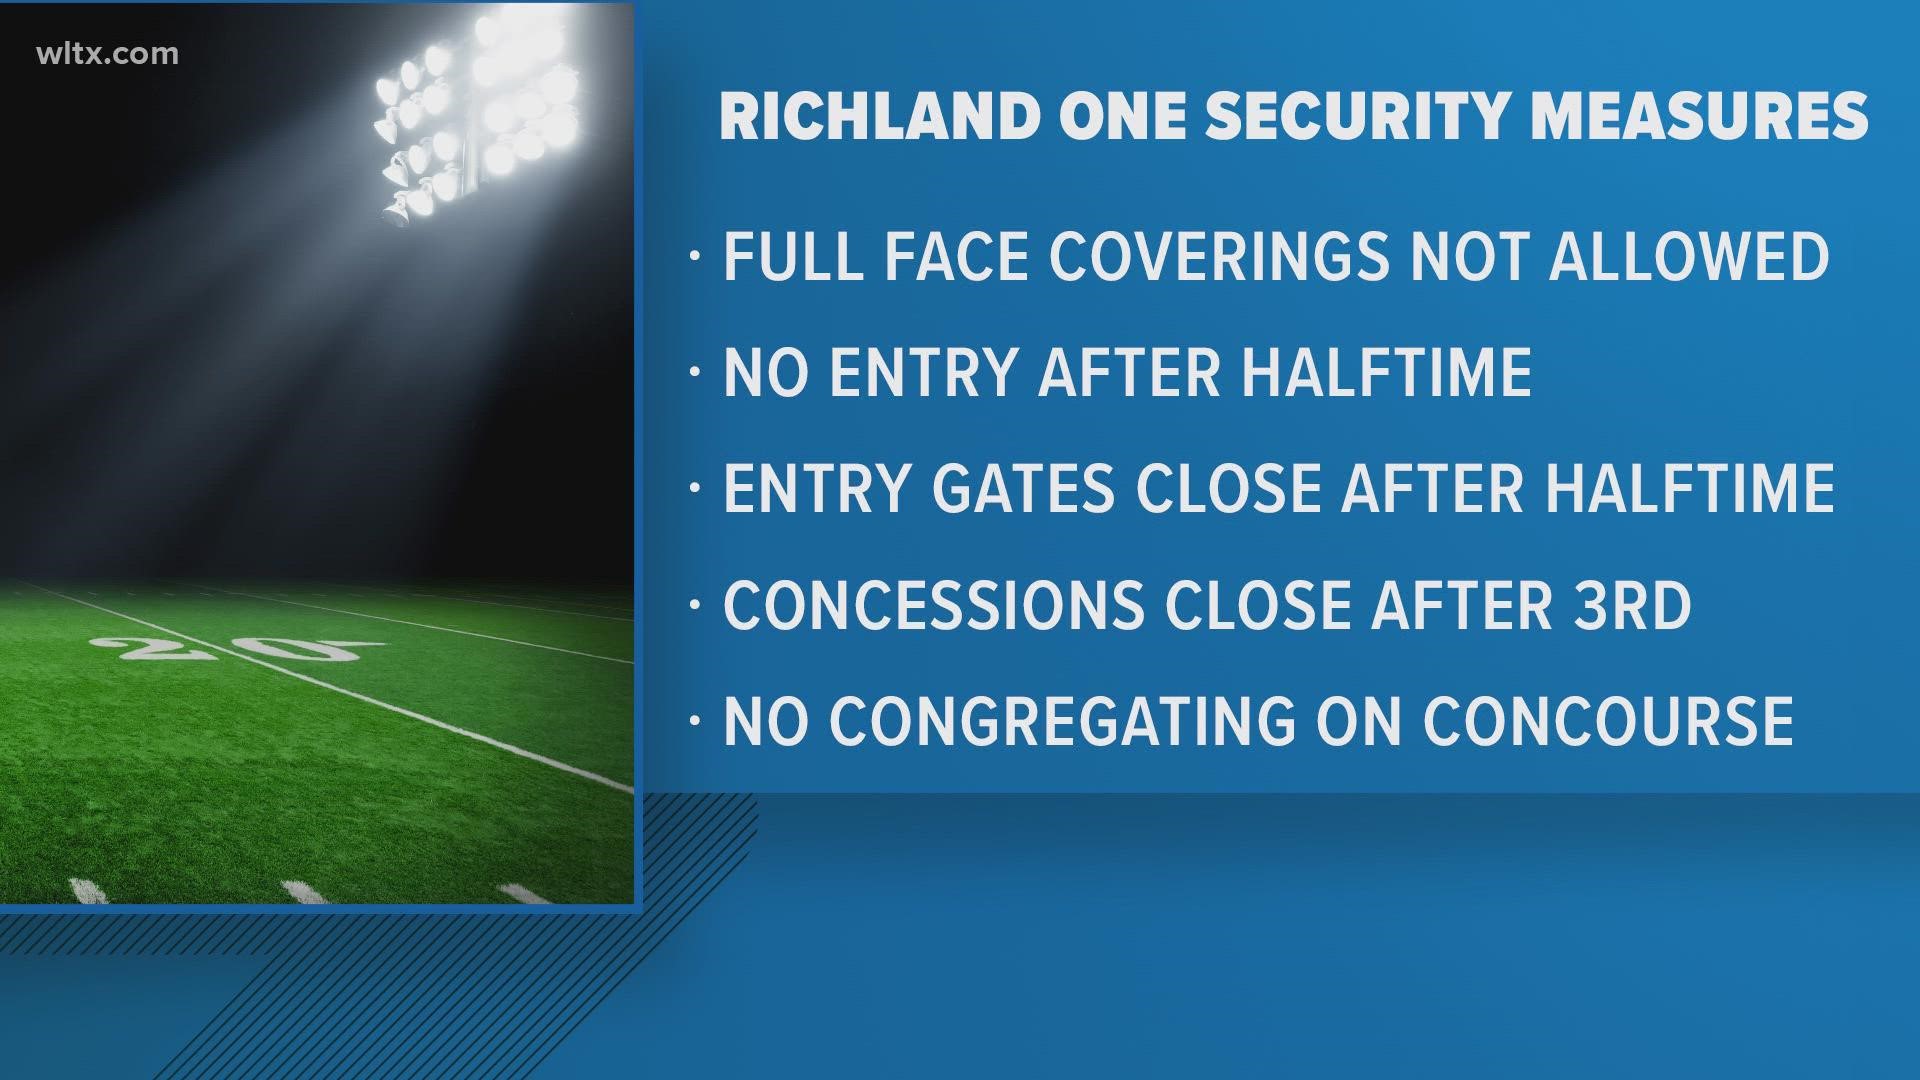 Richland School District One is making security changes for football games starting this coming Friday.